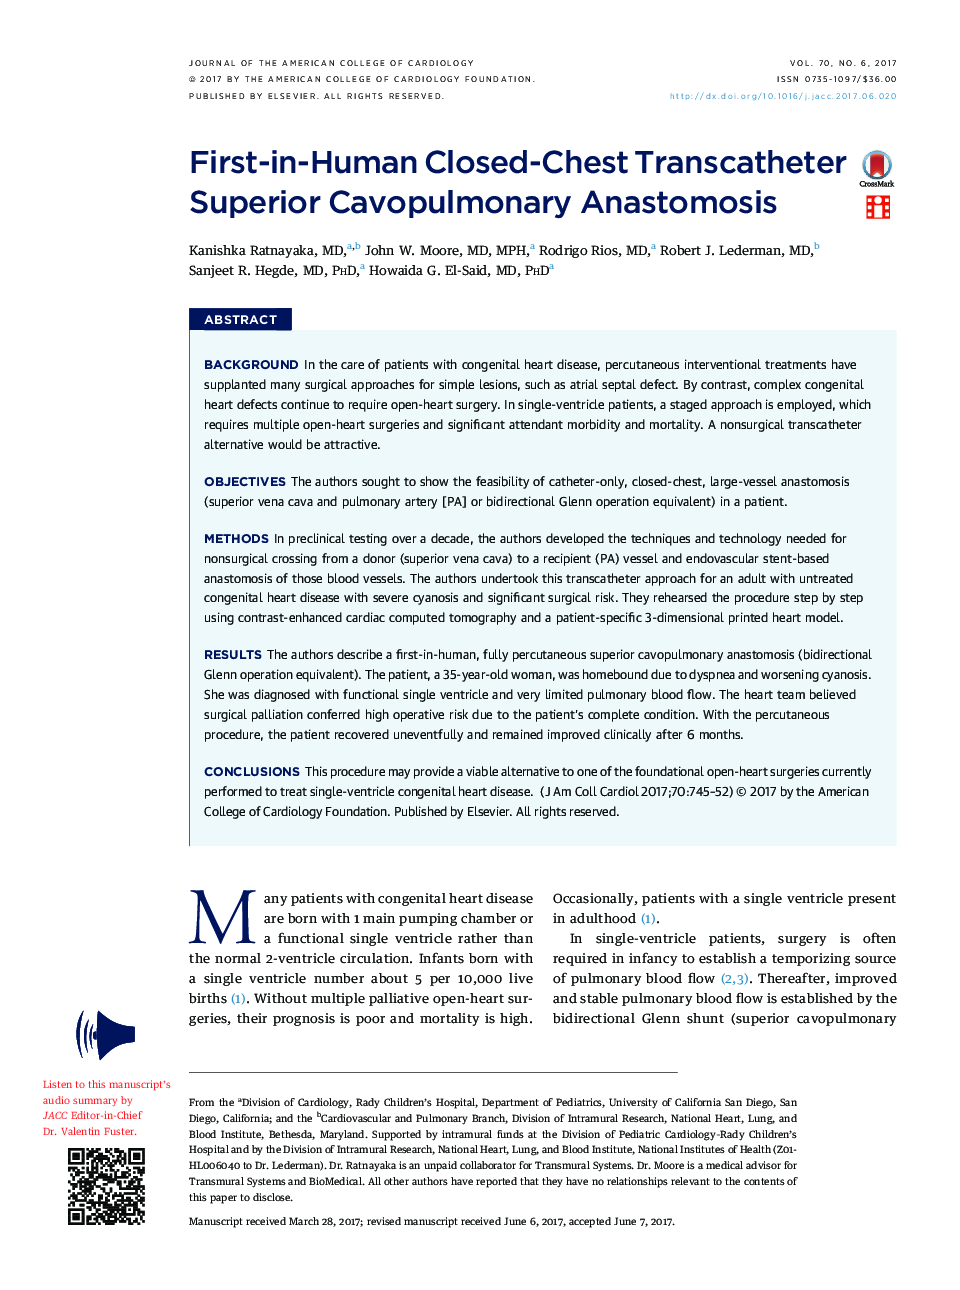 First-in-Human Closed-Chest Transcatheter Superior Cavopulmonary Anastomosis